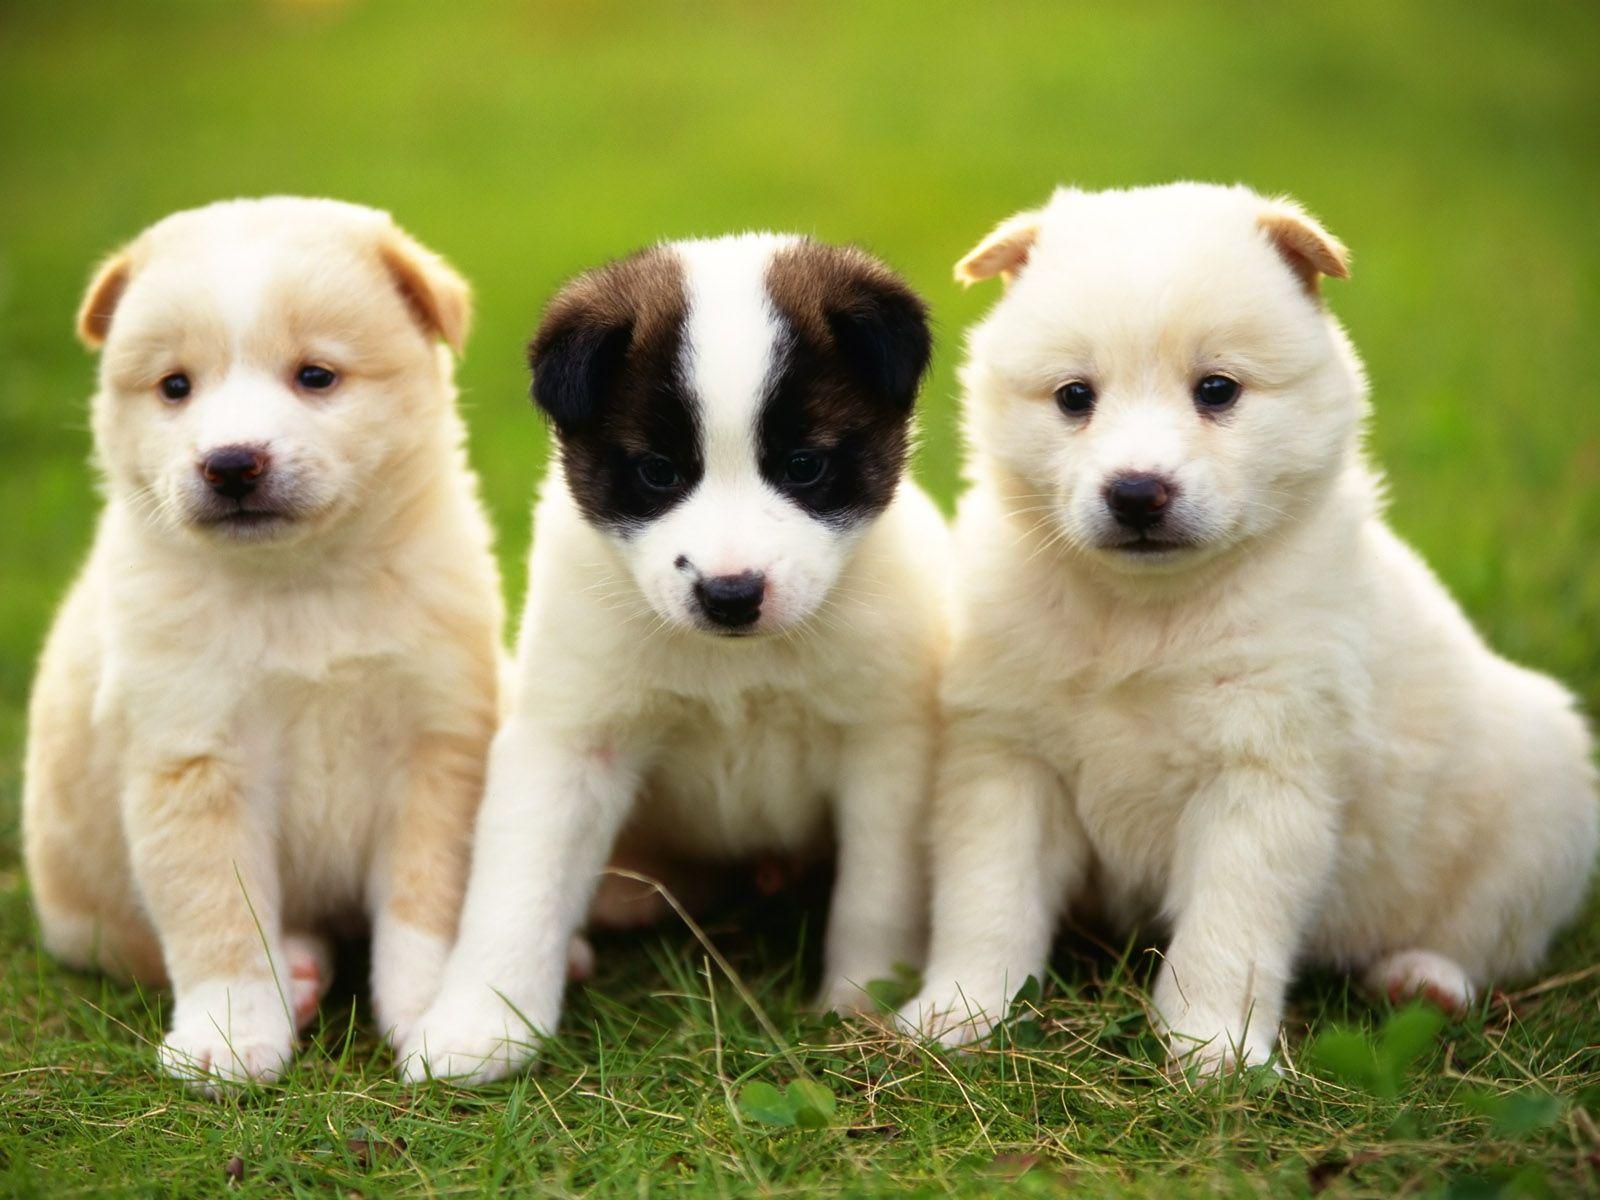 Cute Puppy Picture 60 390649 High Definition Wallpaper. wallalay